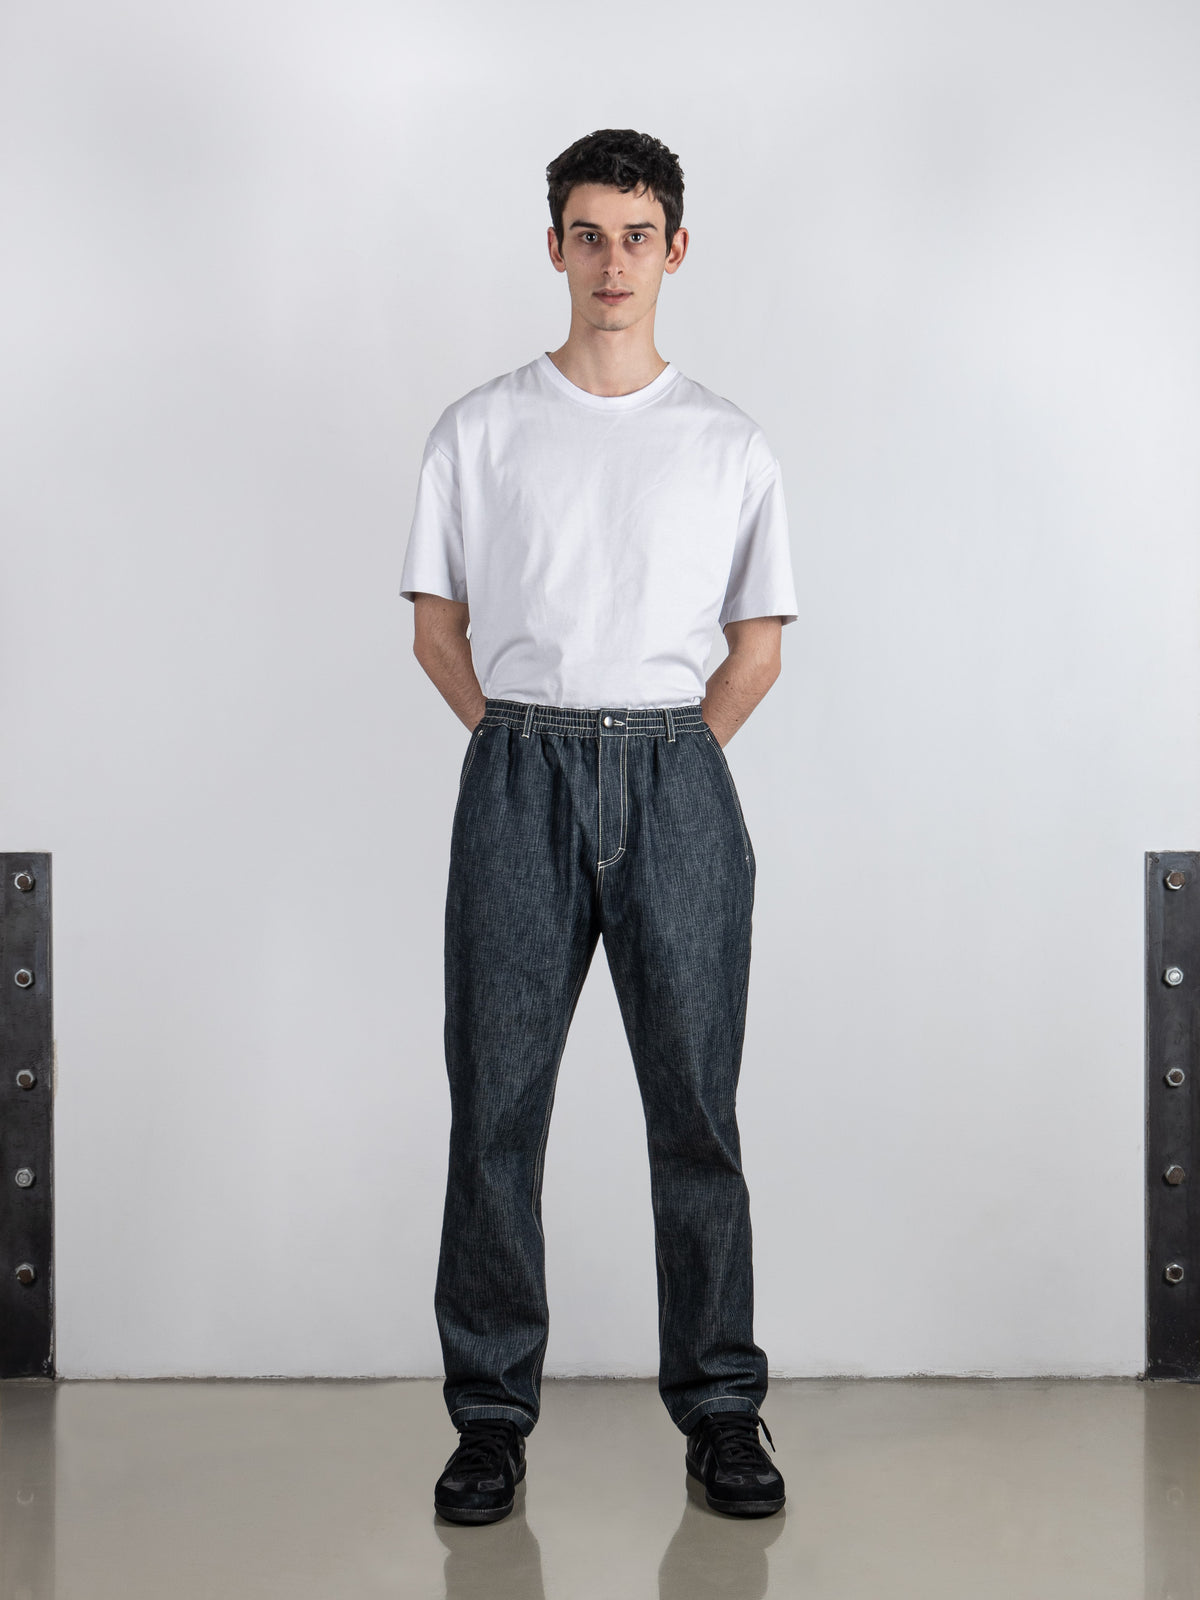 Young man wearing the jeans combined with a white tee, exuding style and confidence.